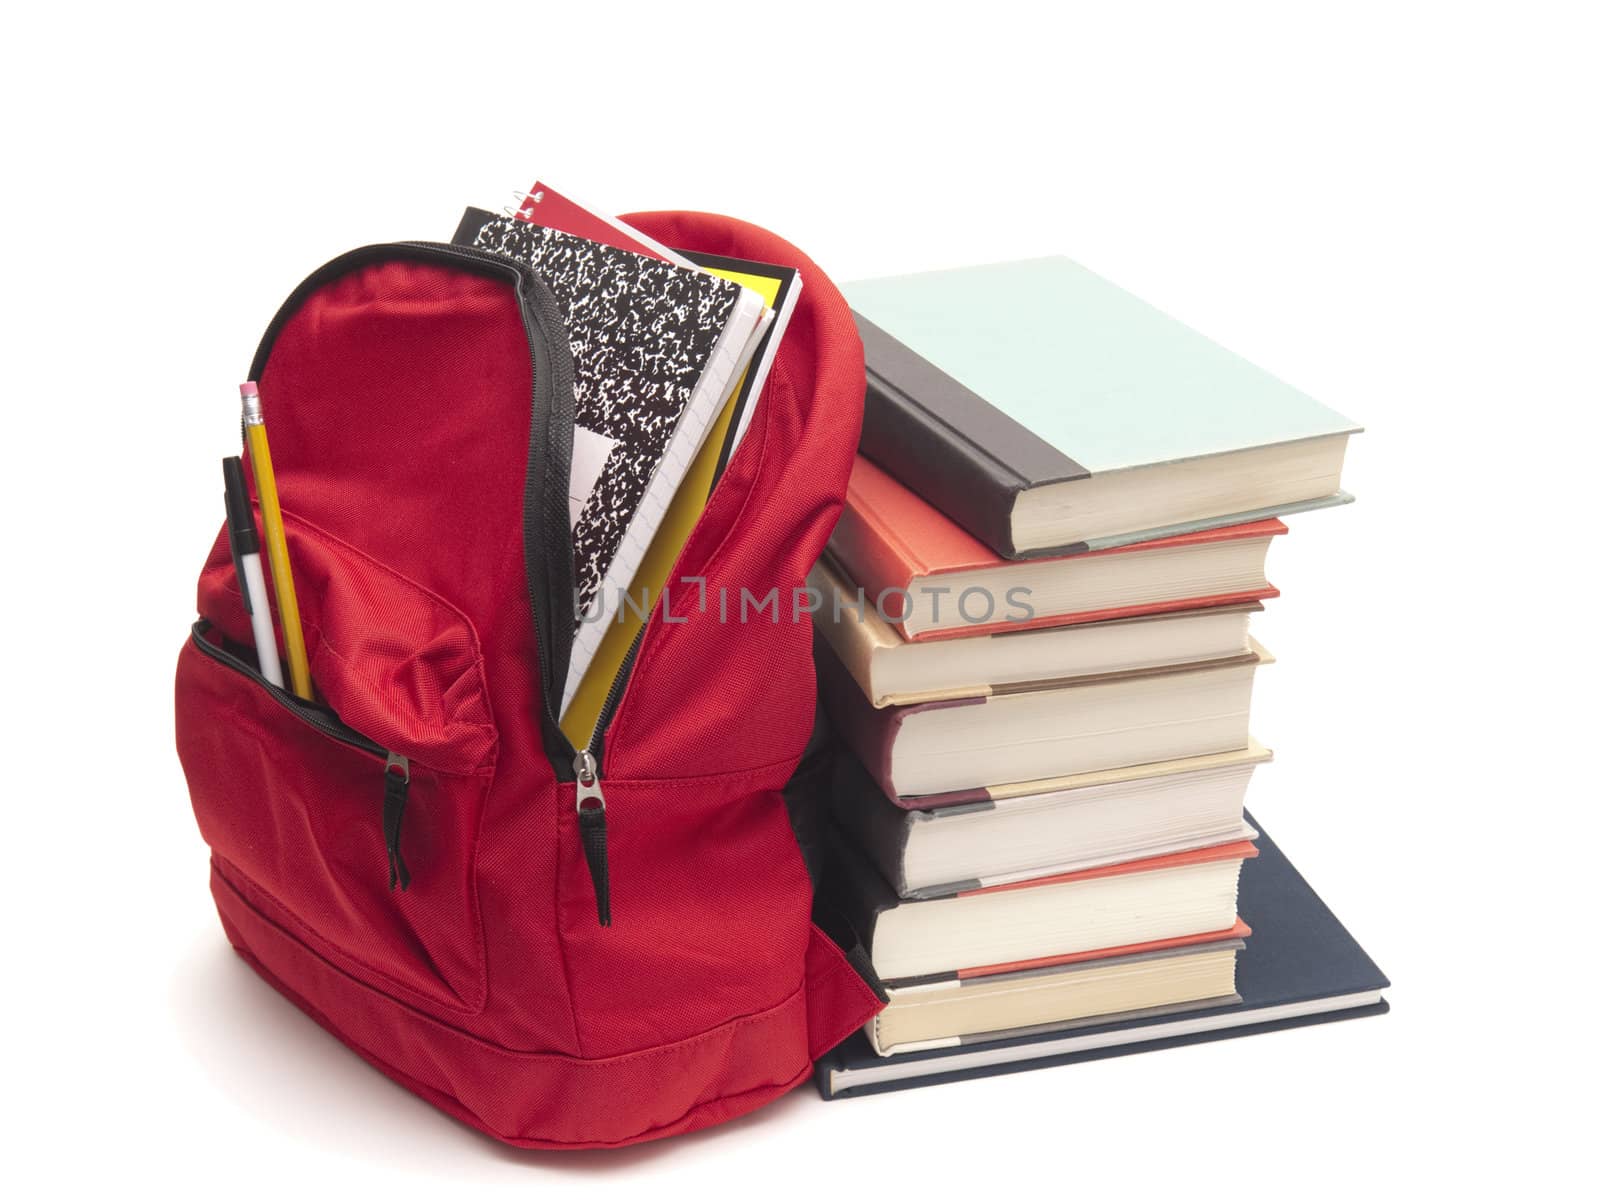 Back-to-school concept with red backpack stuffed with student materials. It is leaning against a stack of textbooks. Isolated on white for easy removal.